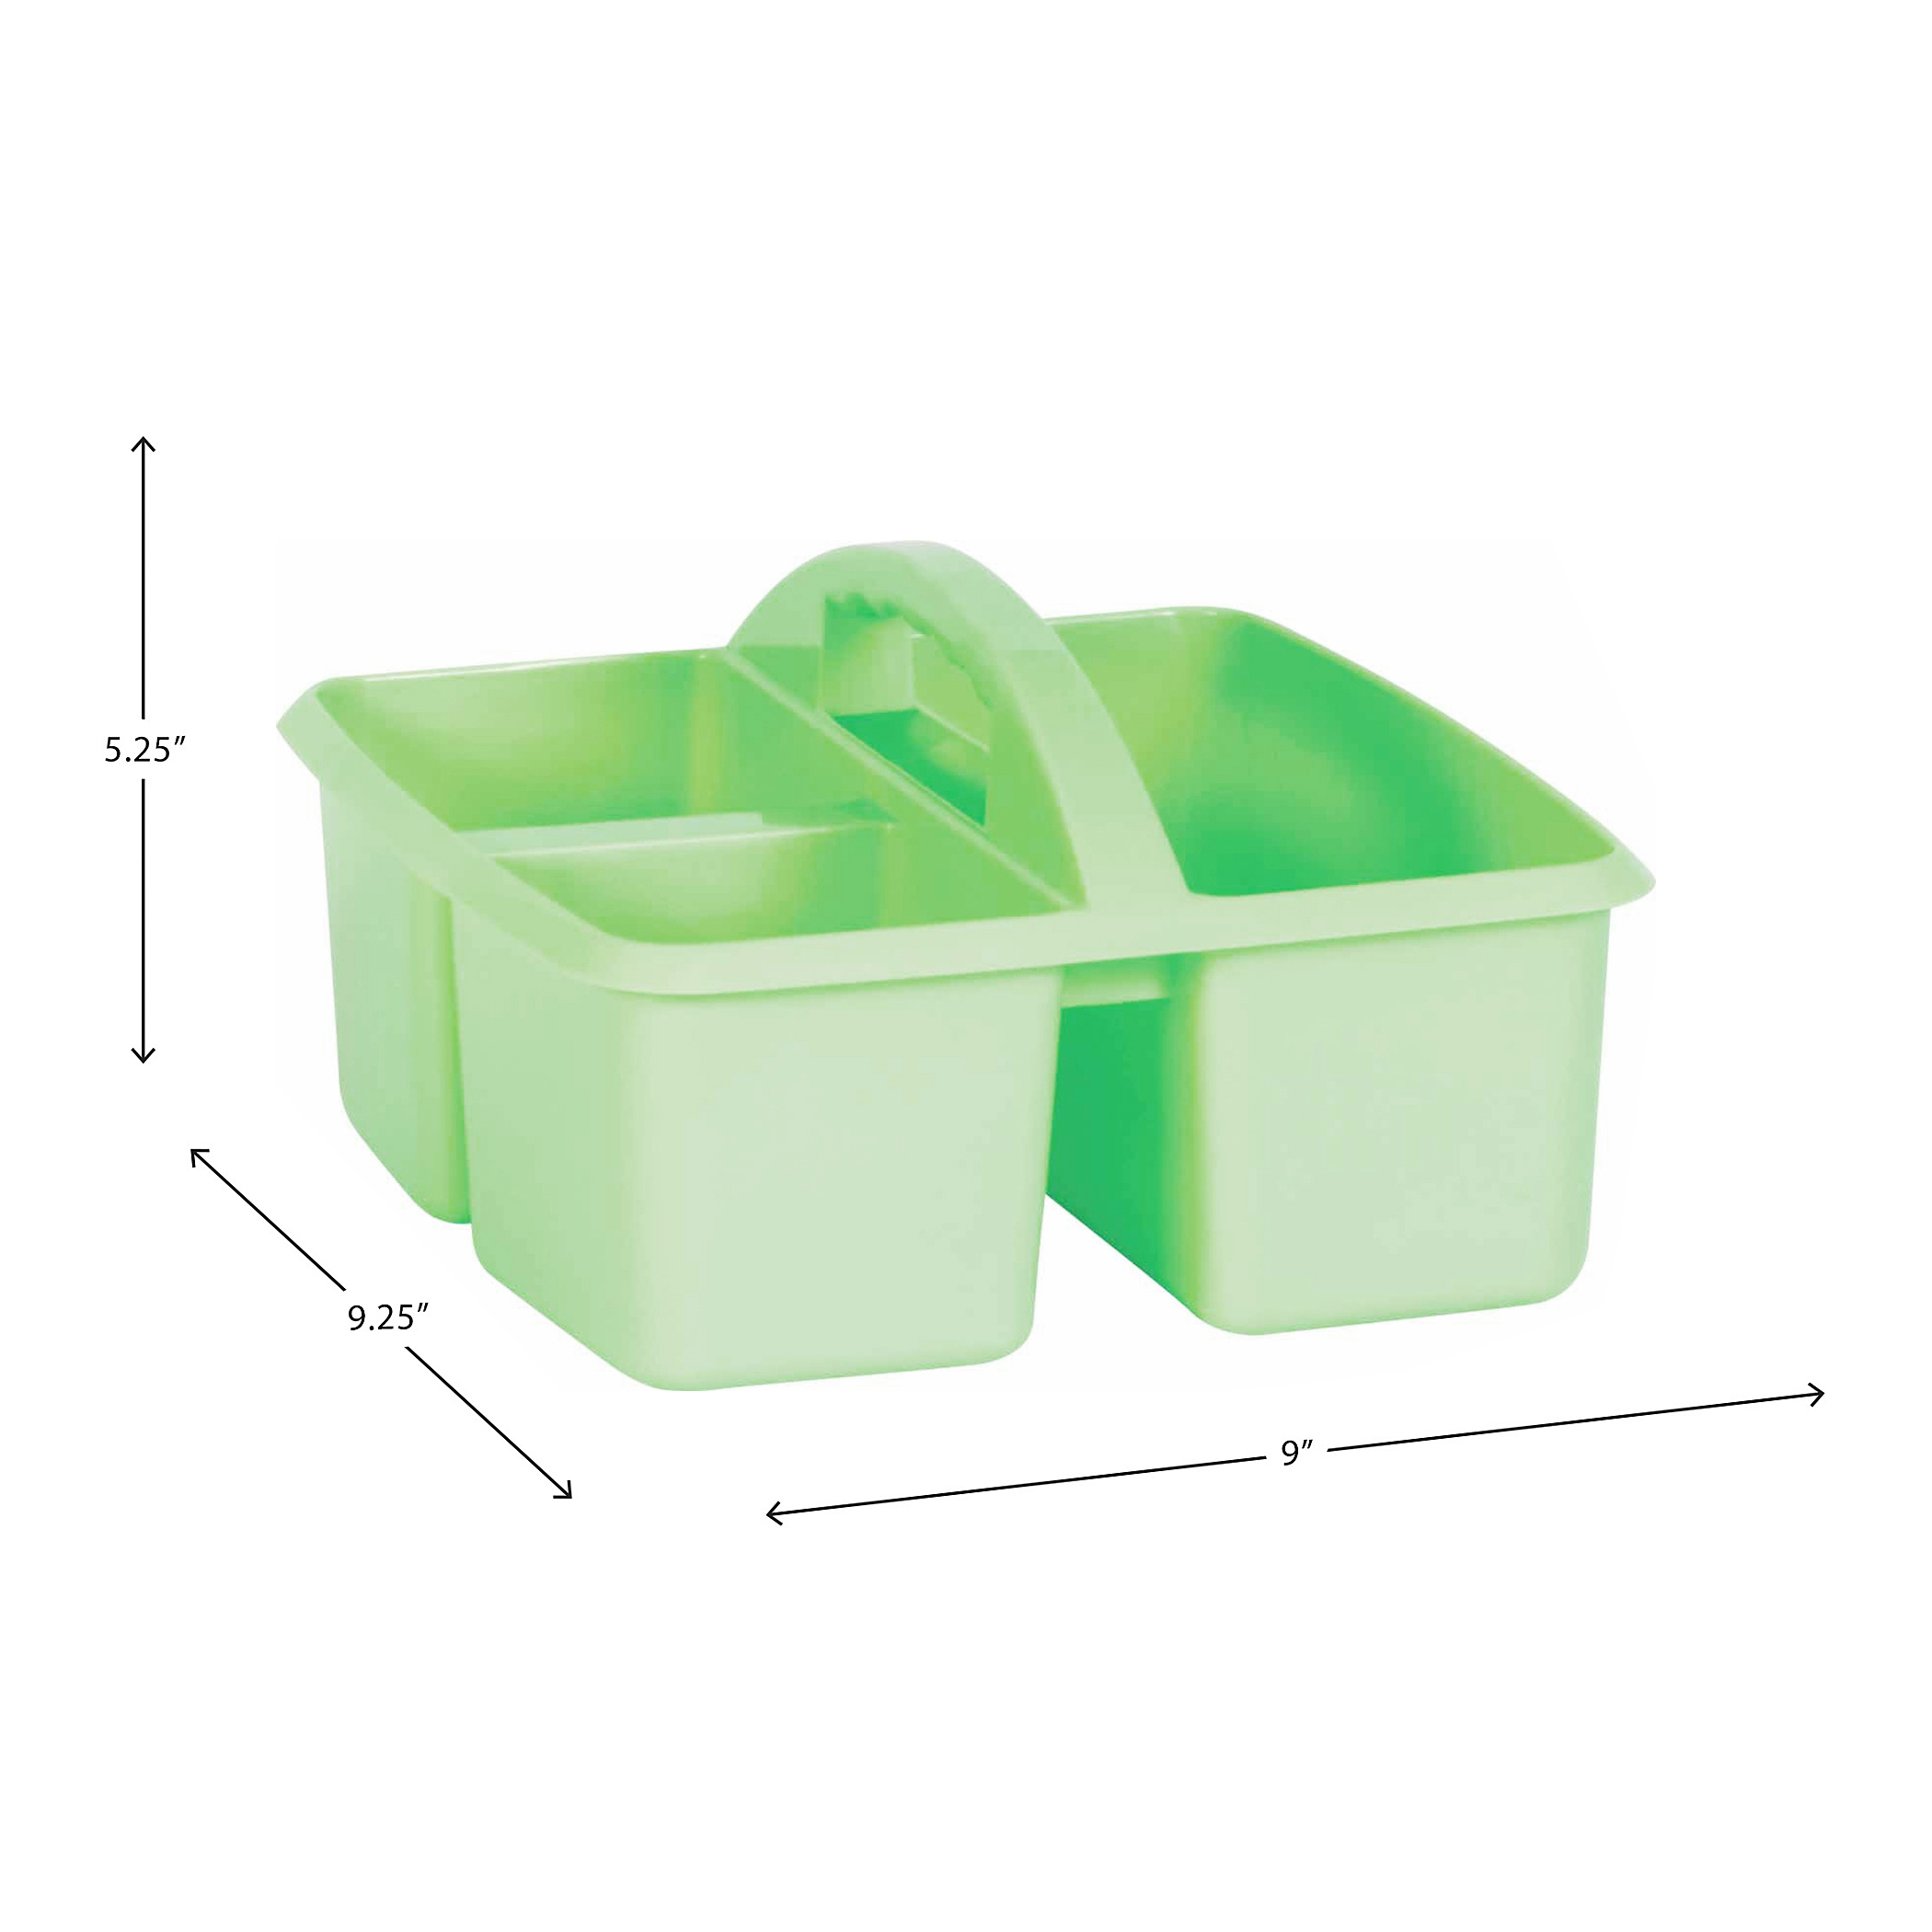 Teal Plastic Storage Caddy - Teacher Created Resources - TCR20911